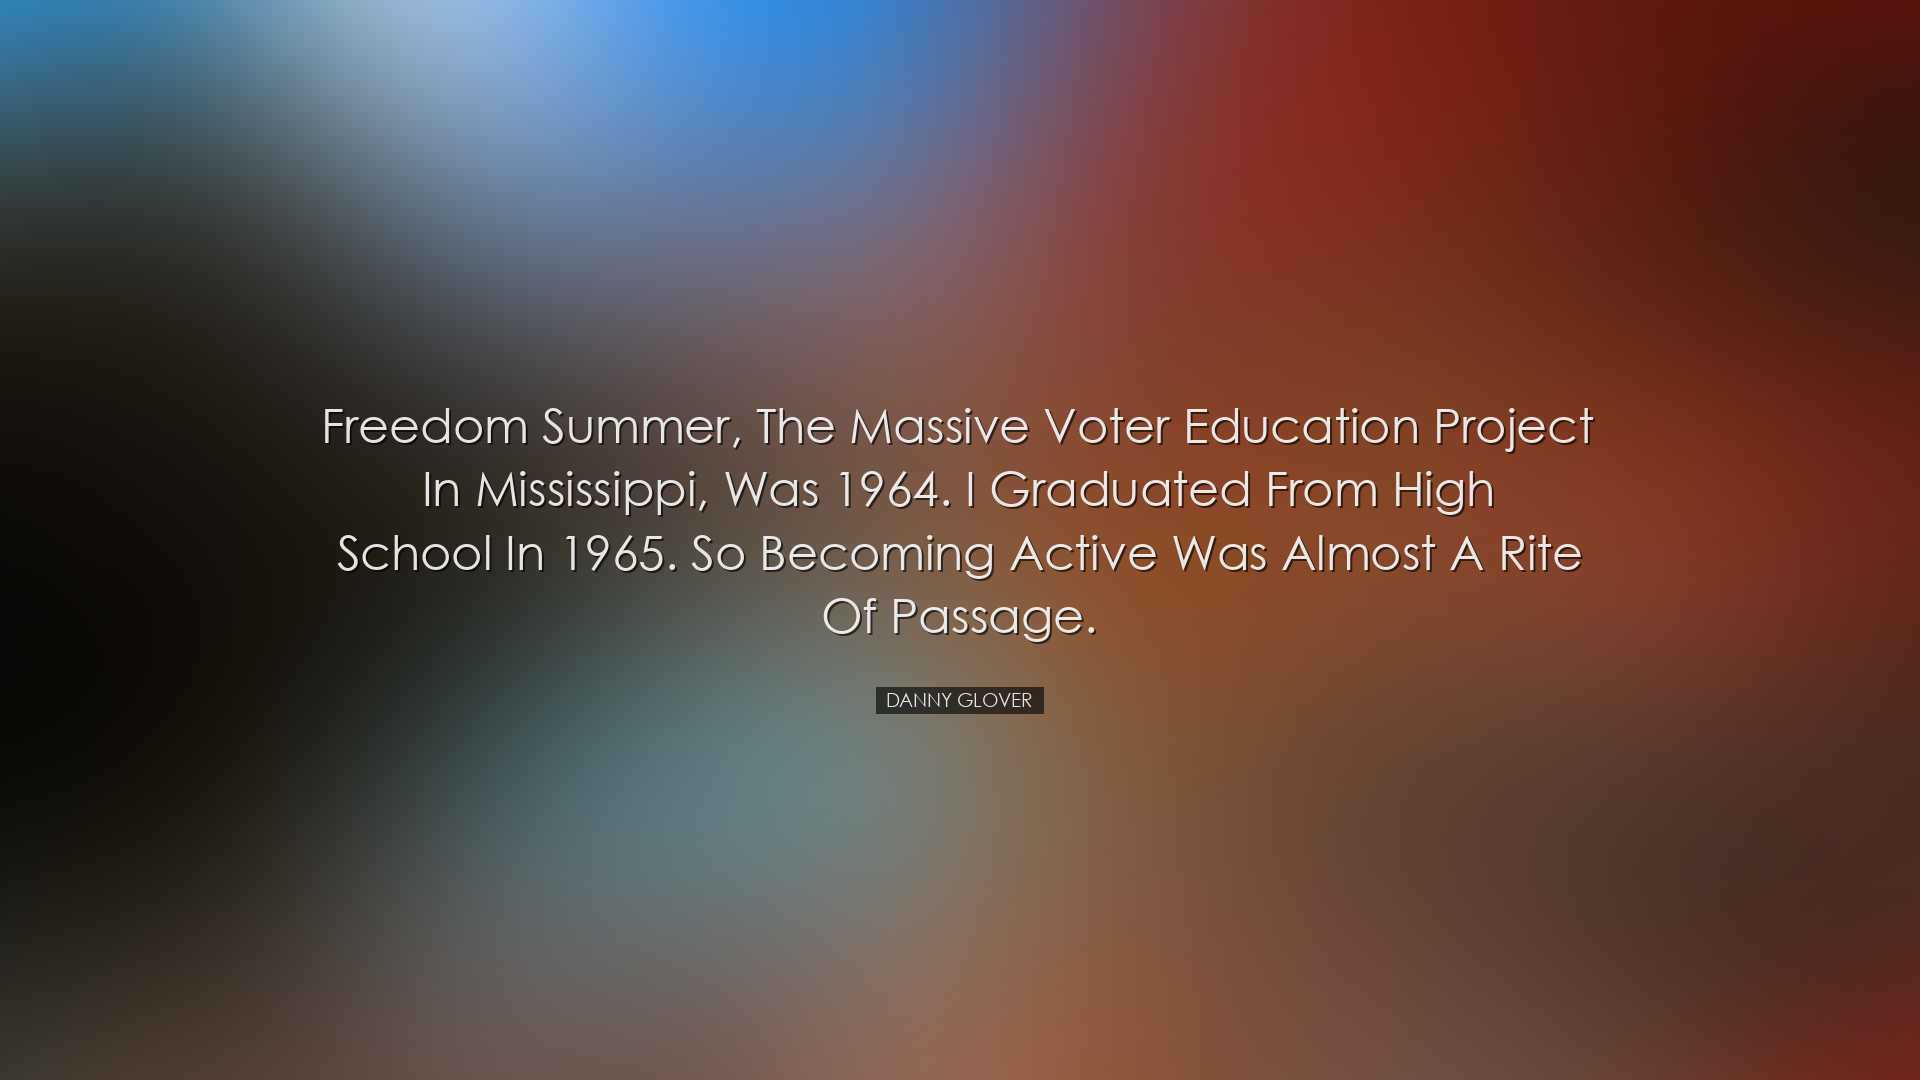 Freedom Summer, the massive voter education project in Mississippi